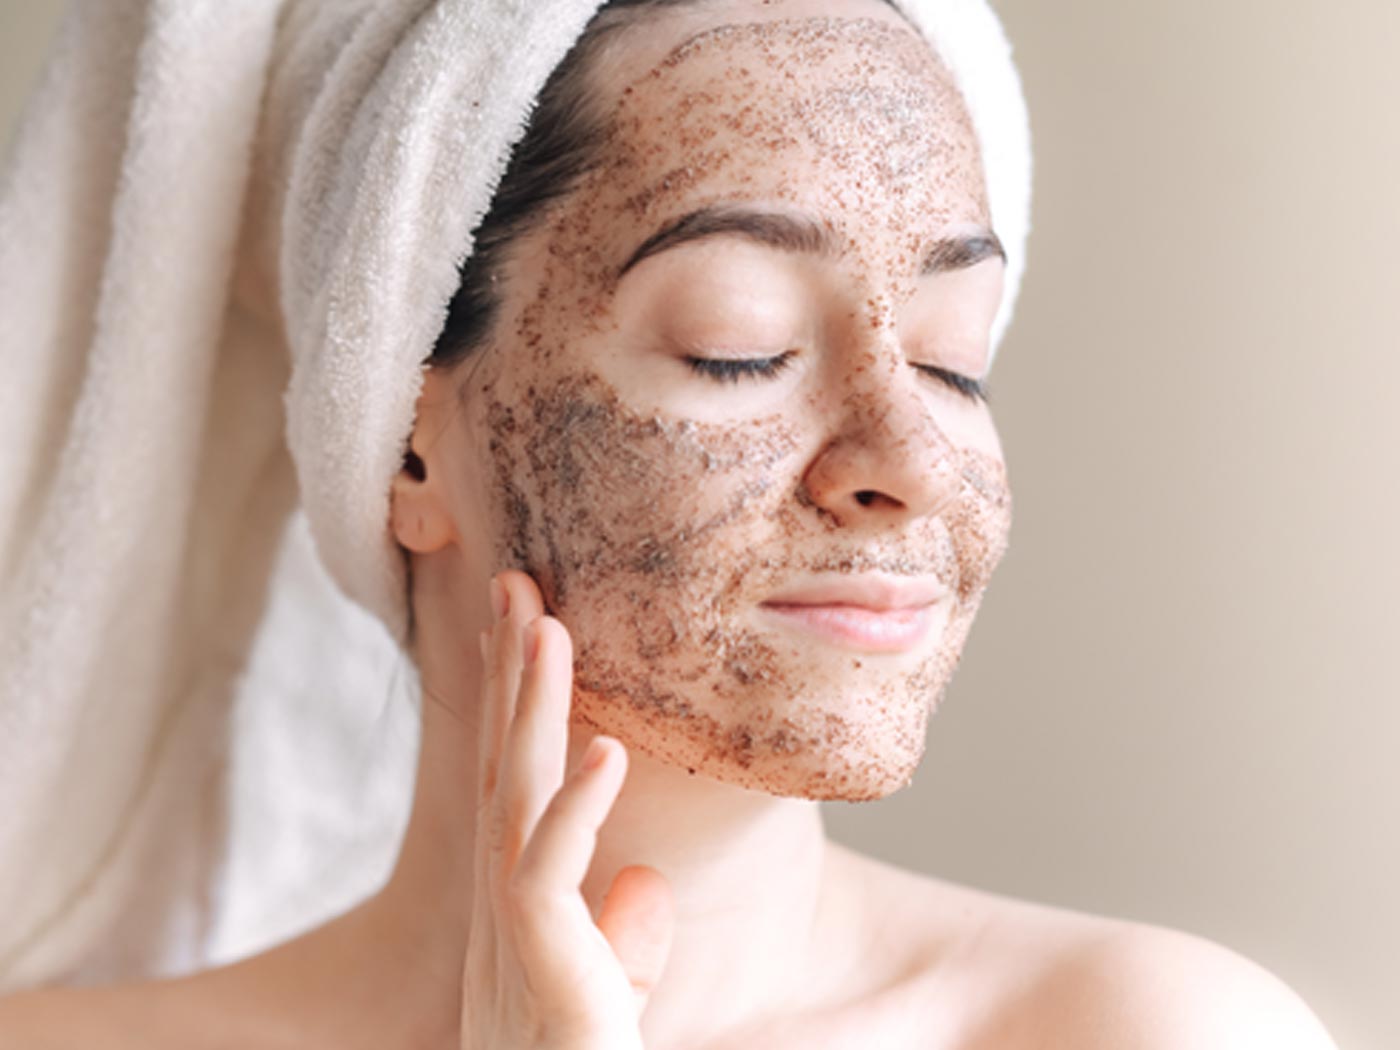  How to apply scrub on face